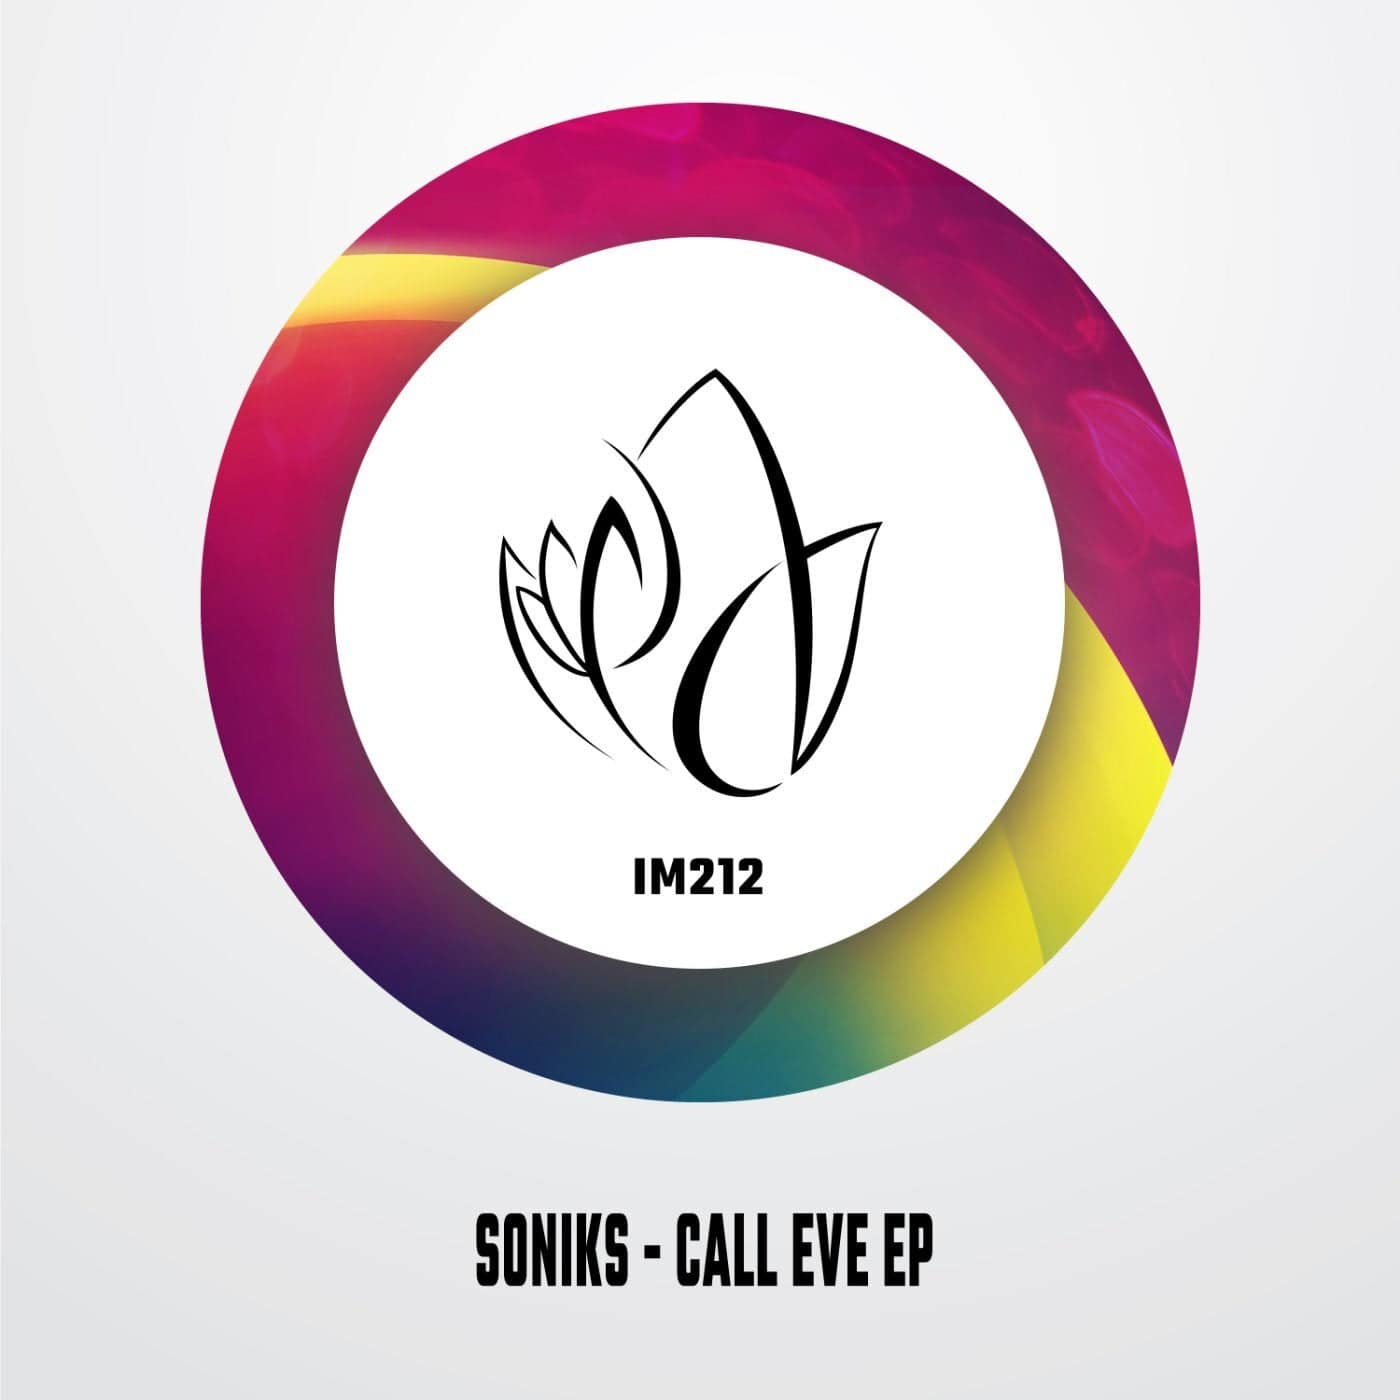 image cover: Soniks - Call Eve EP / IM212